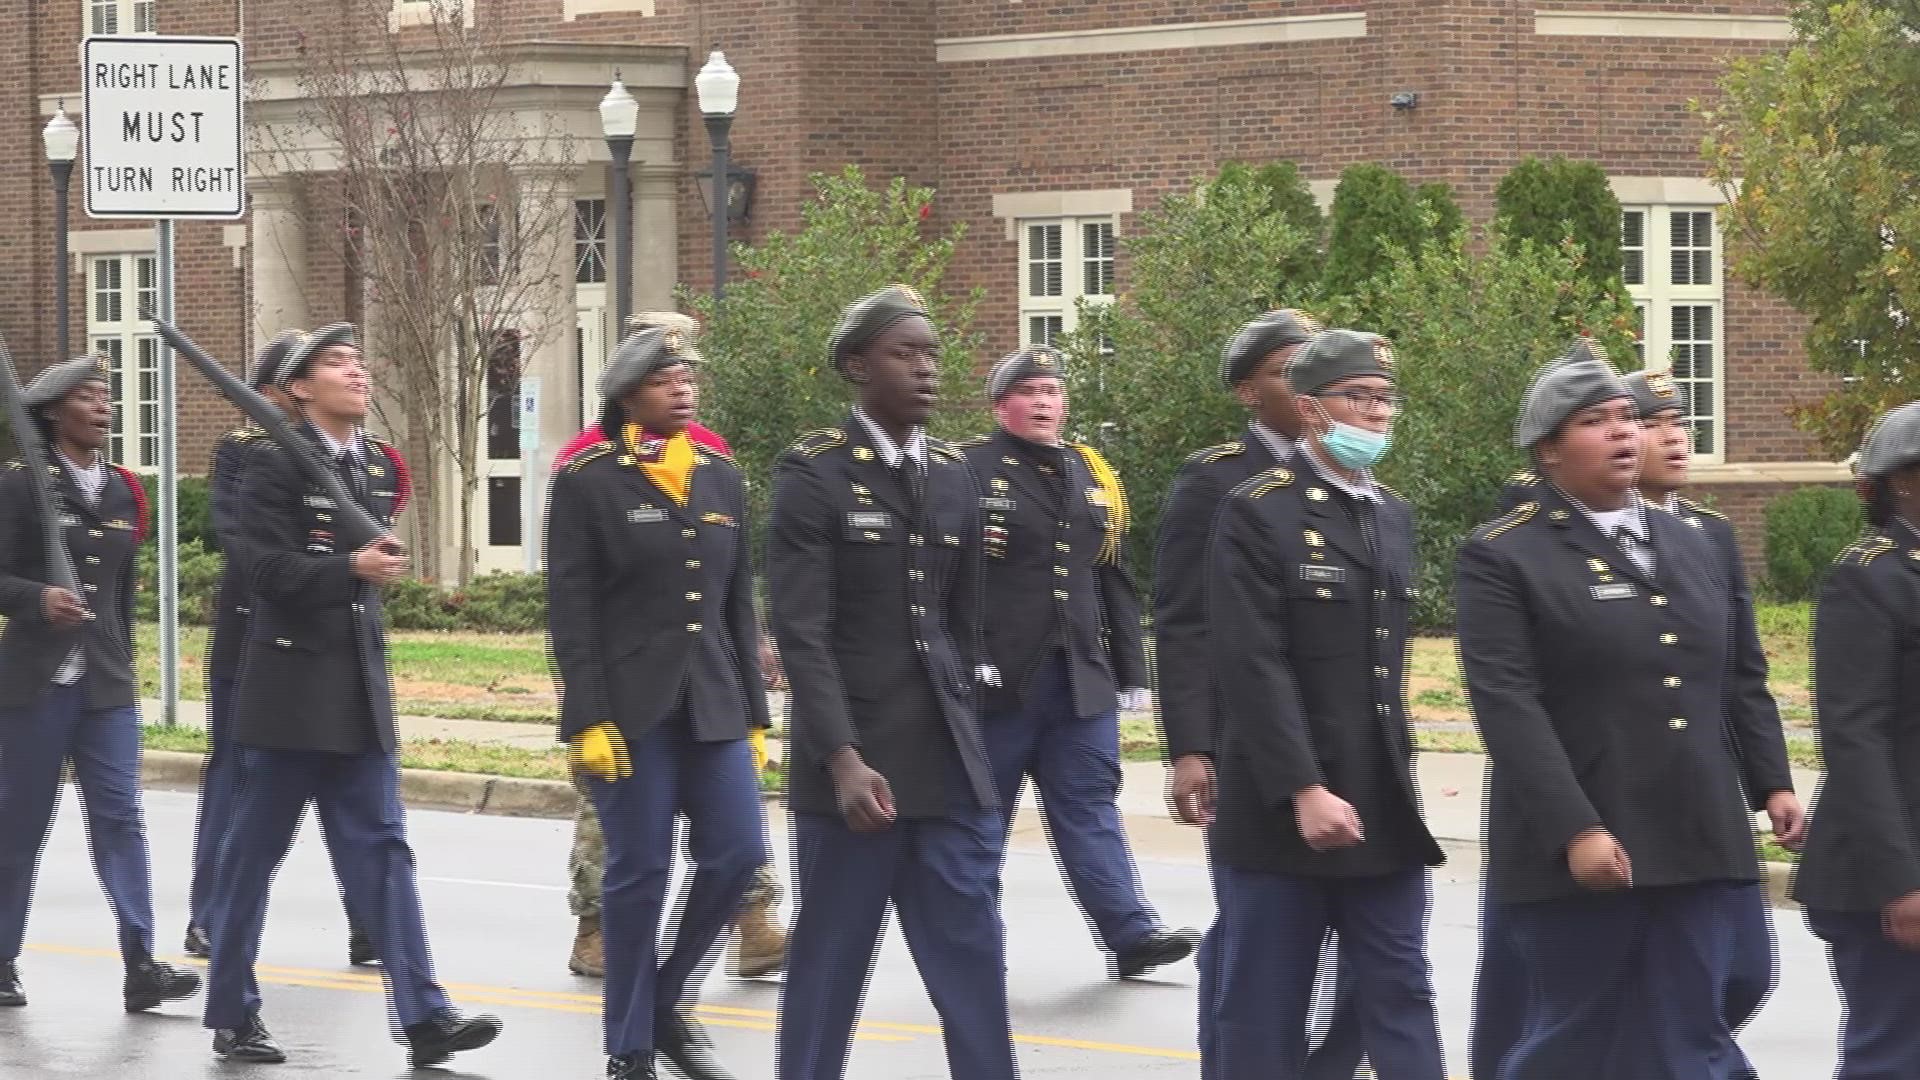 Huntsville hosted their annual Veterans Day Parade to honor and support those who have served.